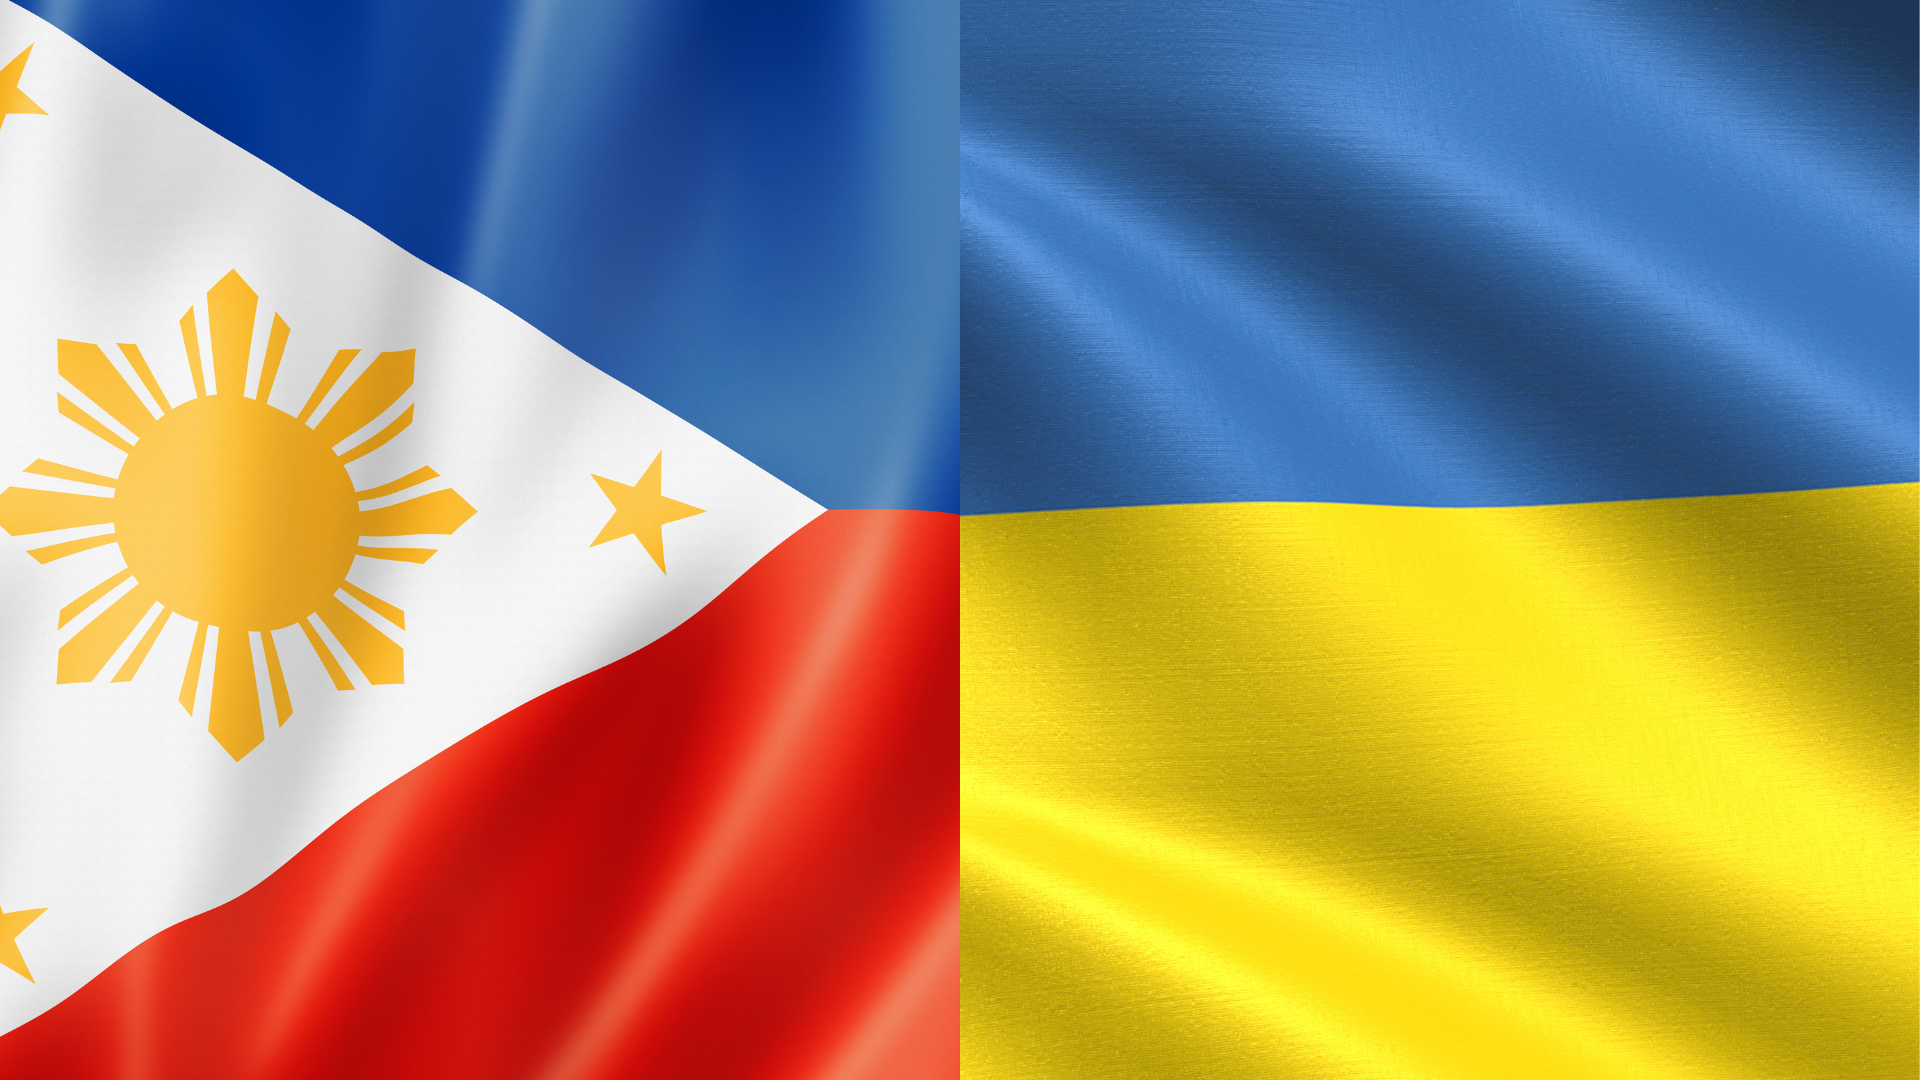 The Ukraine government is committed to opening an embassy in Manila when the Russia-Ukraine conflict ends, an envoy said Wednesday.